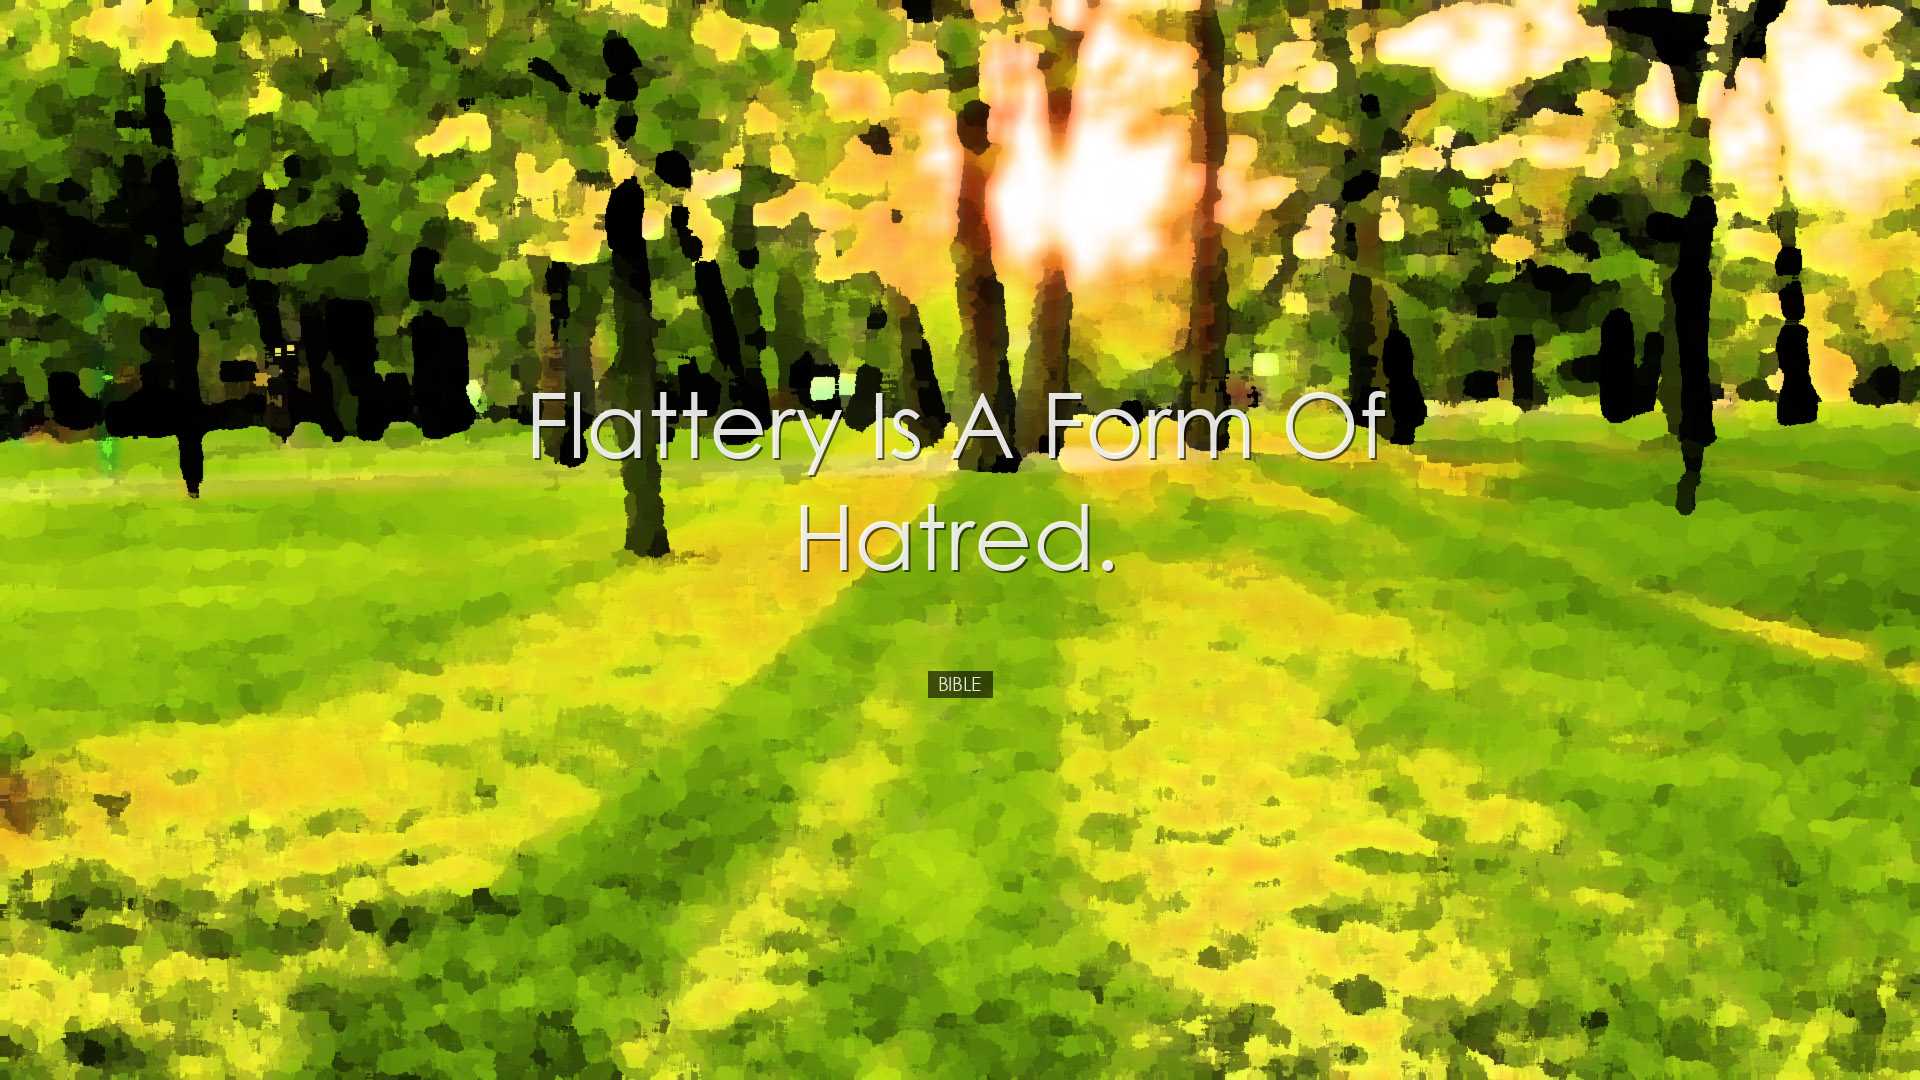 Flattery is a form of hatred. - Bible